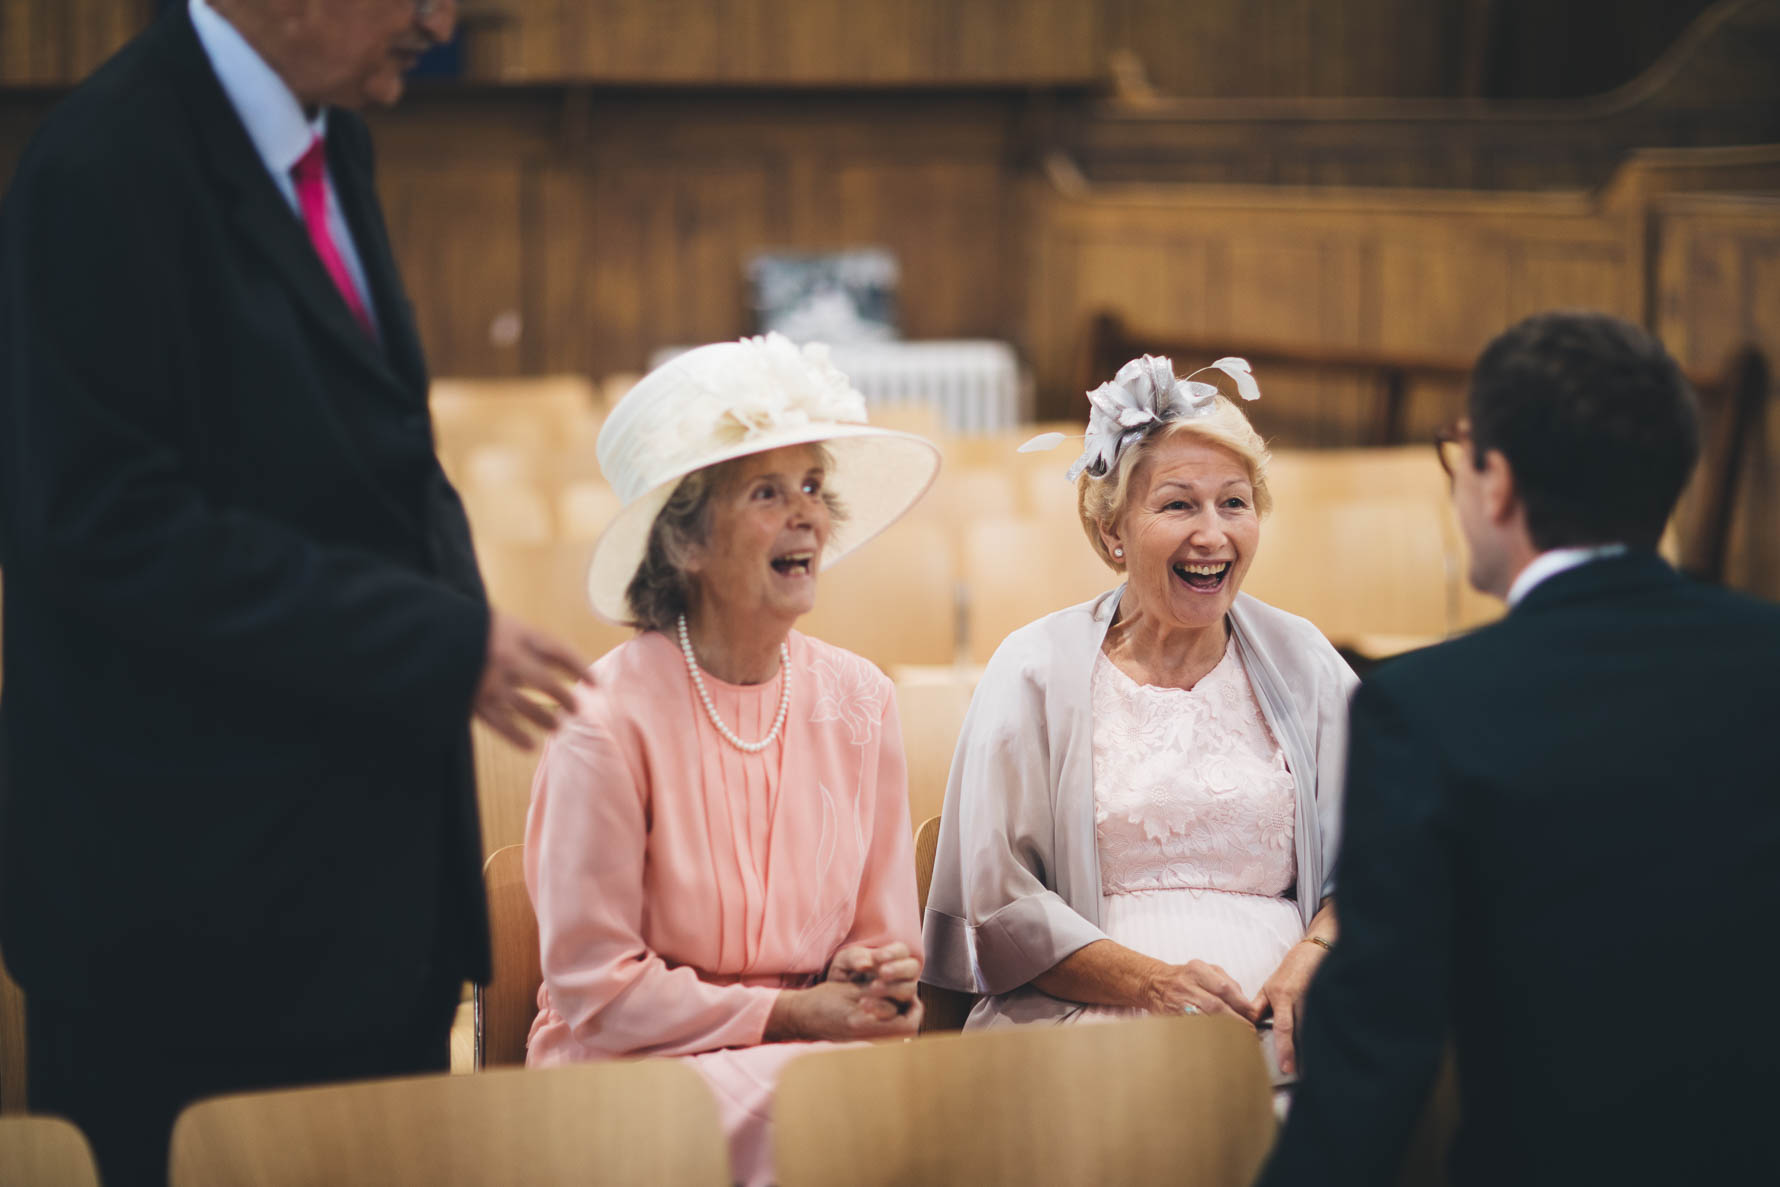 Two older ladies, one wearing a hat, the other a fascinator, seated, lauging and smiling looking towards the groom who is stood in front of them